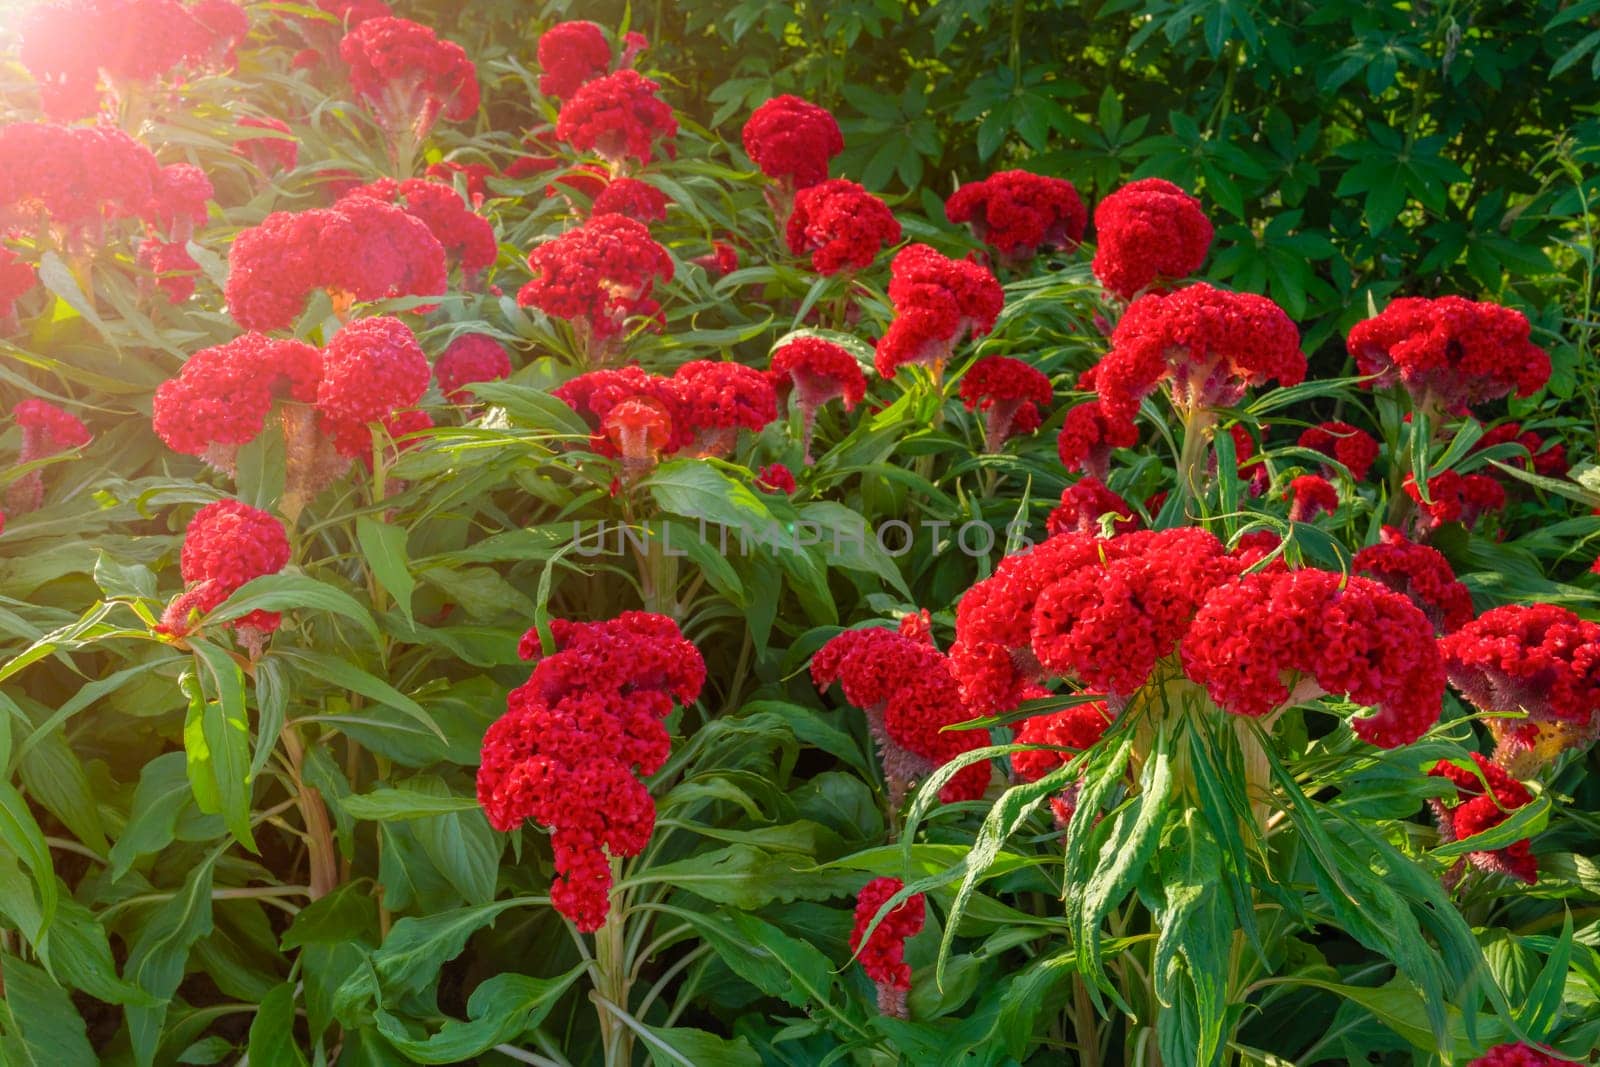 Red crested cockscomb (Celosia argentea var. cristata) growing in a tropical garden. by Gamjai